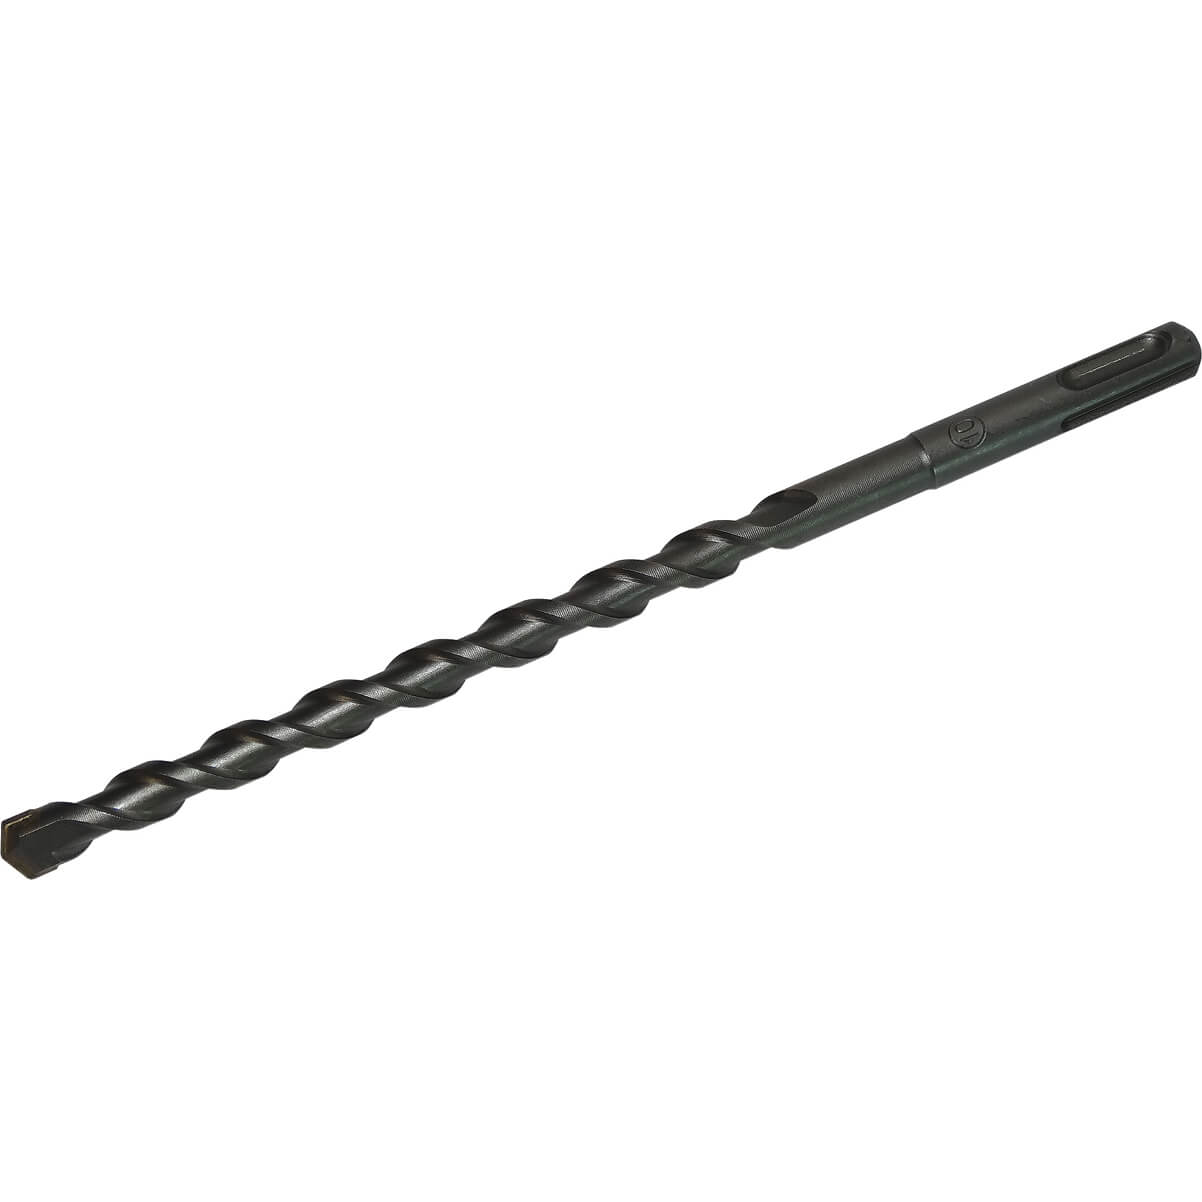 Image of CK SDS Plus Masonry Drill Bit 5mm 160mm Pack of 1